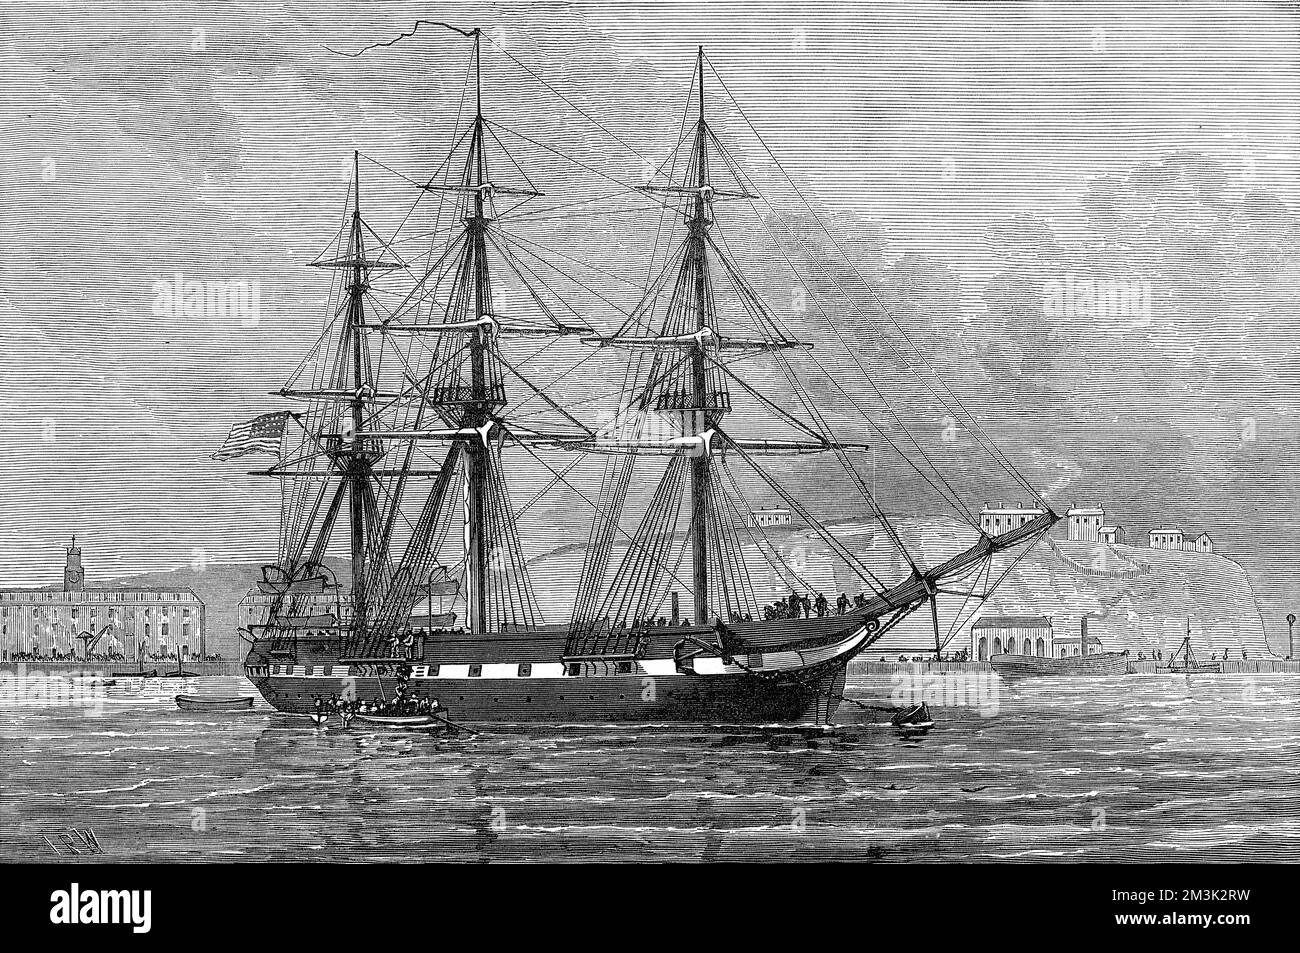 The United States frigate, Constellation, with relief stores and provisions for the relief of Irish distress, in Cork Harbour. Extreme hunger among the Irish peasantry was brought on by the potato famine in the mid 19th century and further compounded by the forced evictions of poverty-stricken peasants from their homes and farms.  1880 Stock Photo